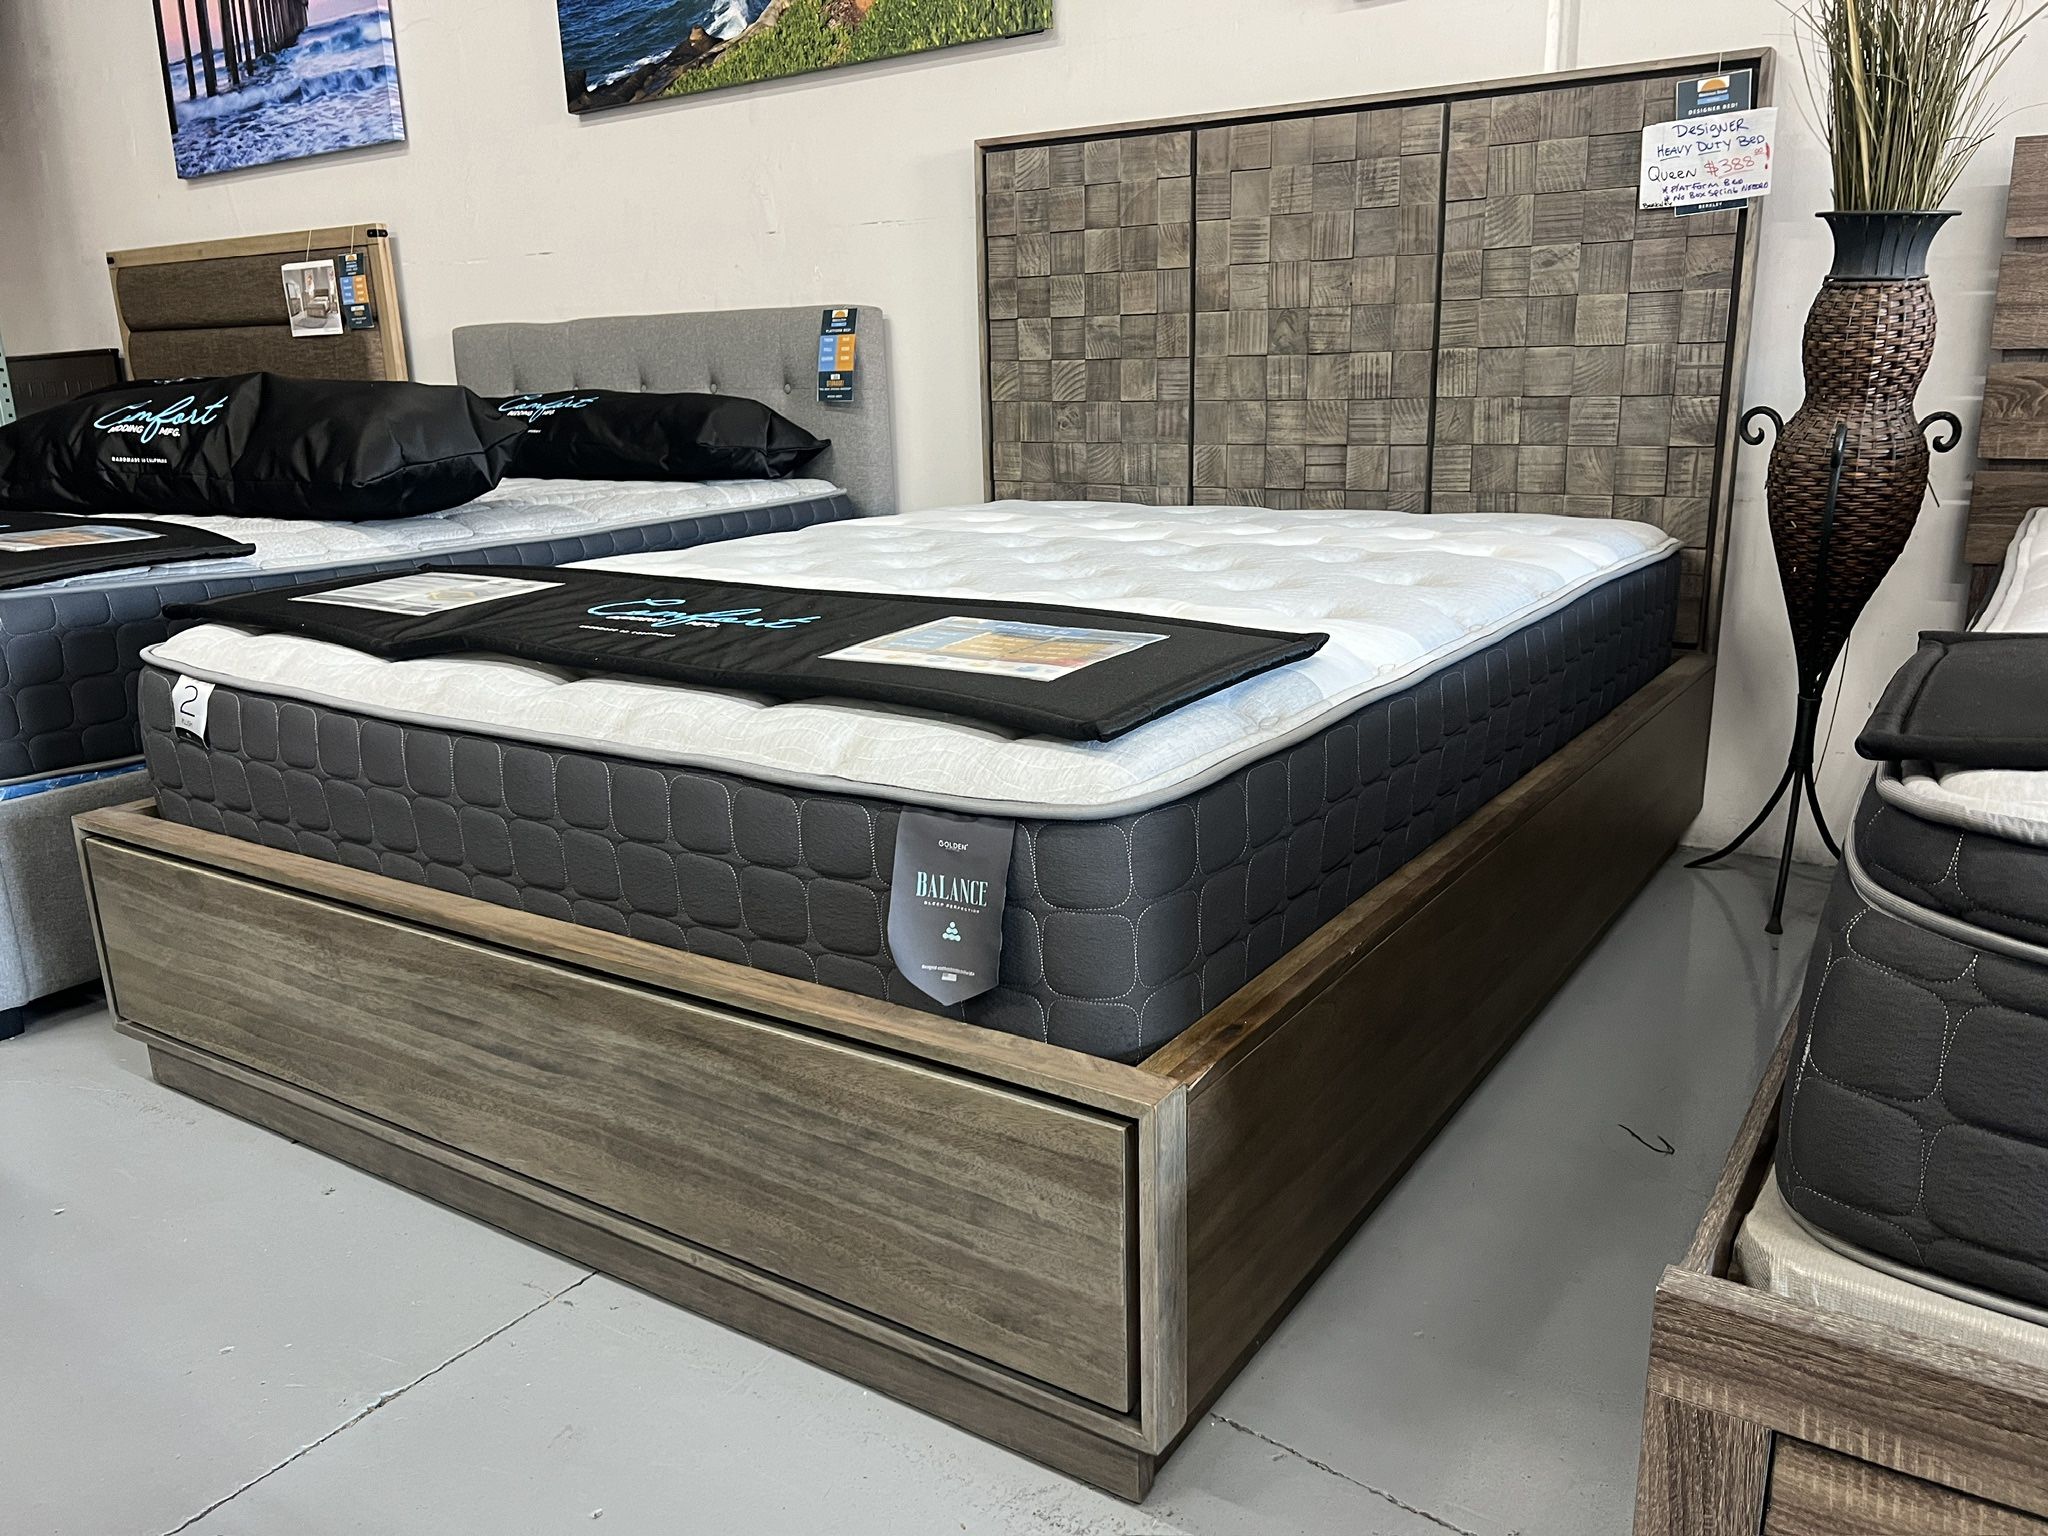 REDUCED Designer Wooden Platform Bed Heavy Duty By Modus Only avail in Queen $328 